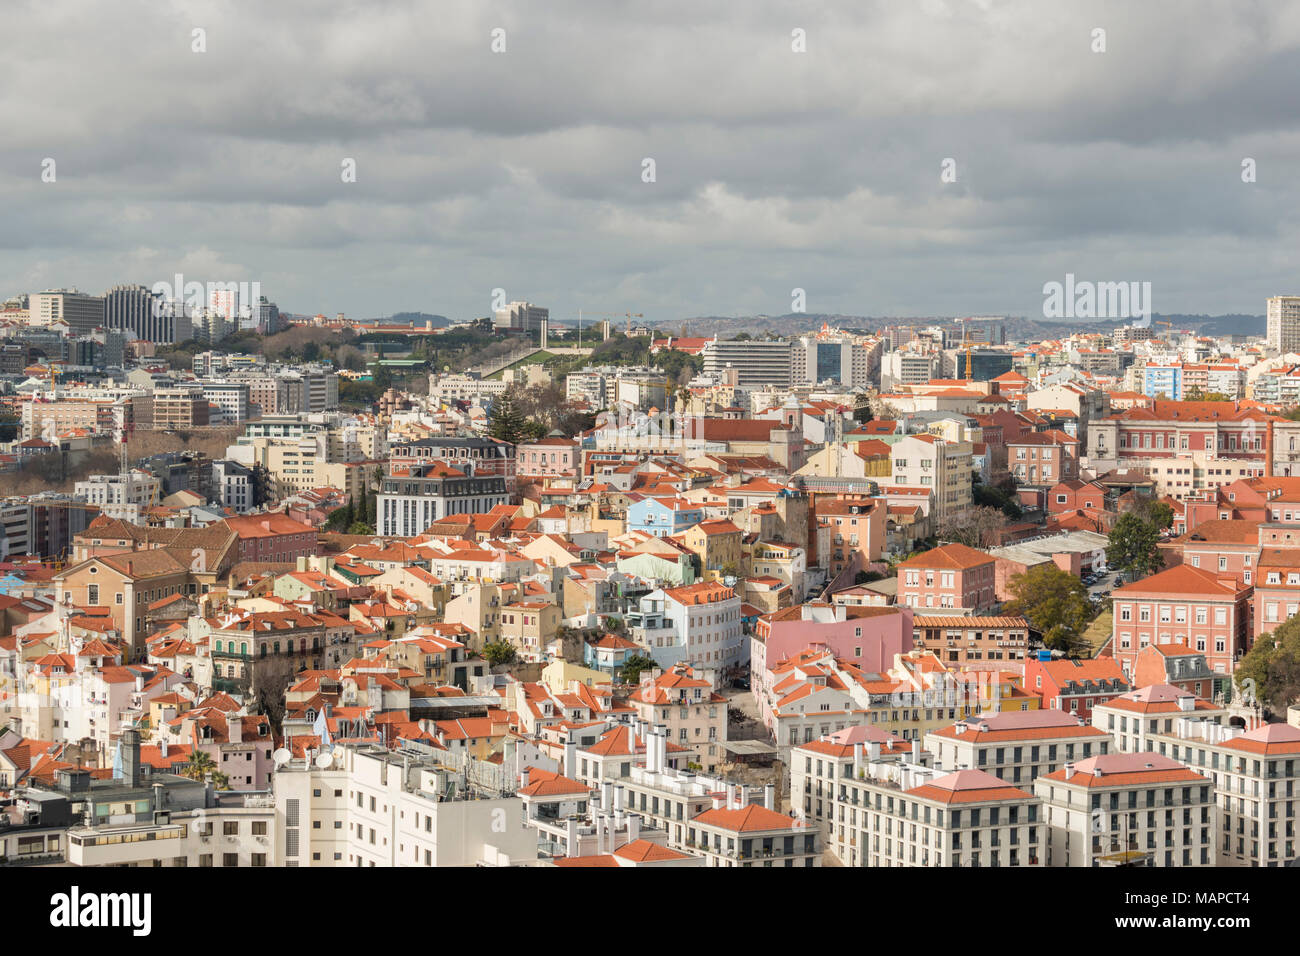 Rooftop views across the city from the historic Alfama neighbourhood district in the centre of Lisbon, Portugal. Stock Photo